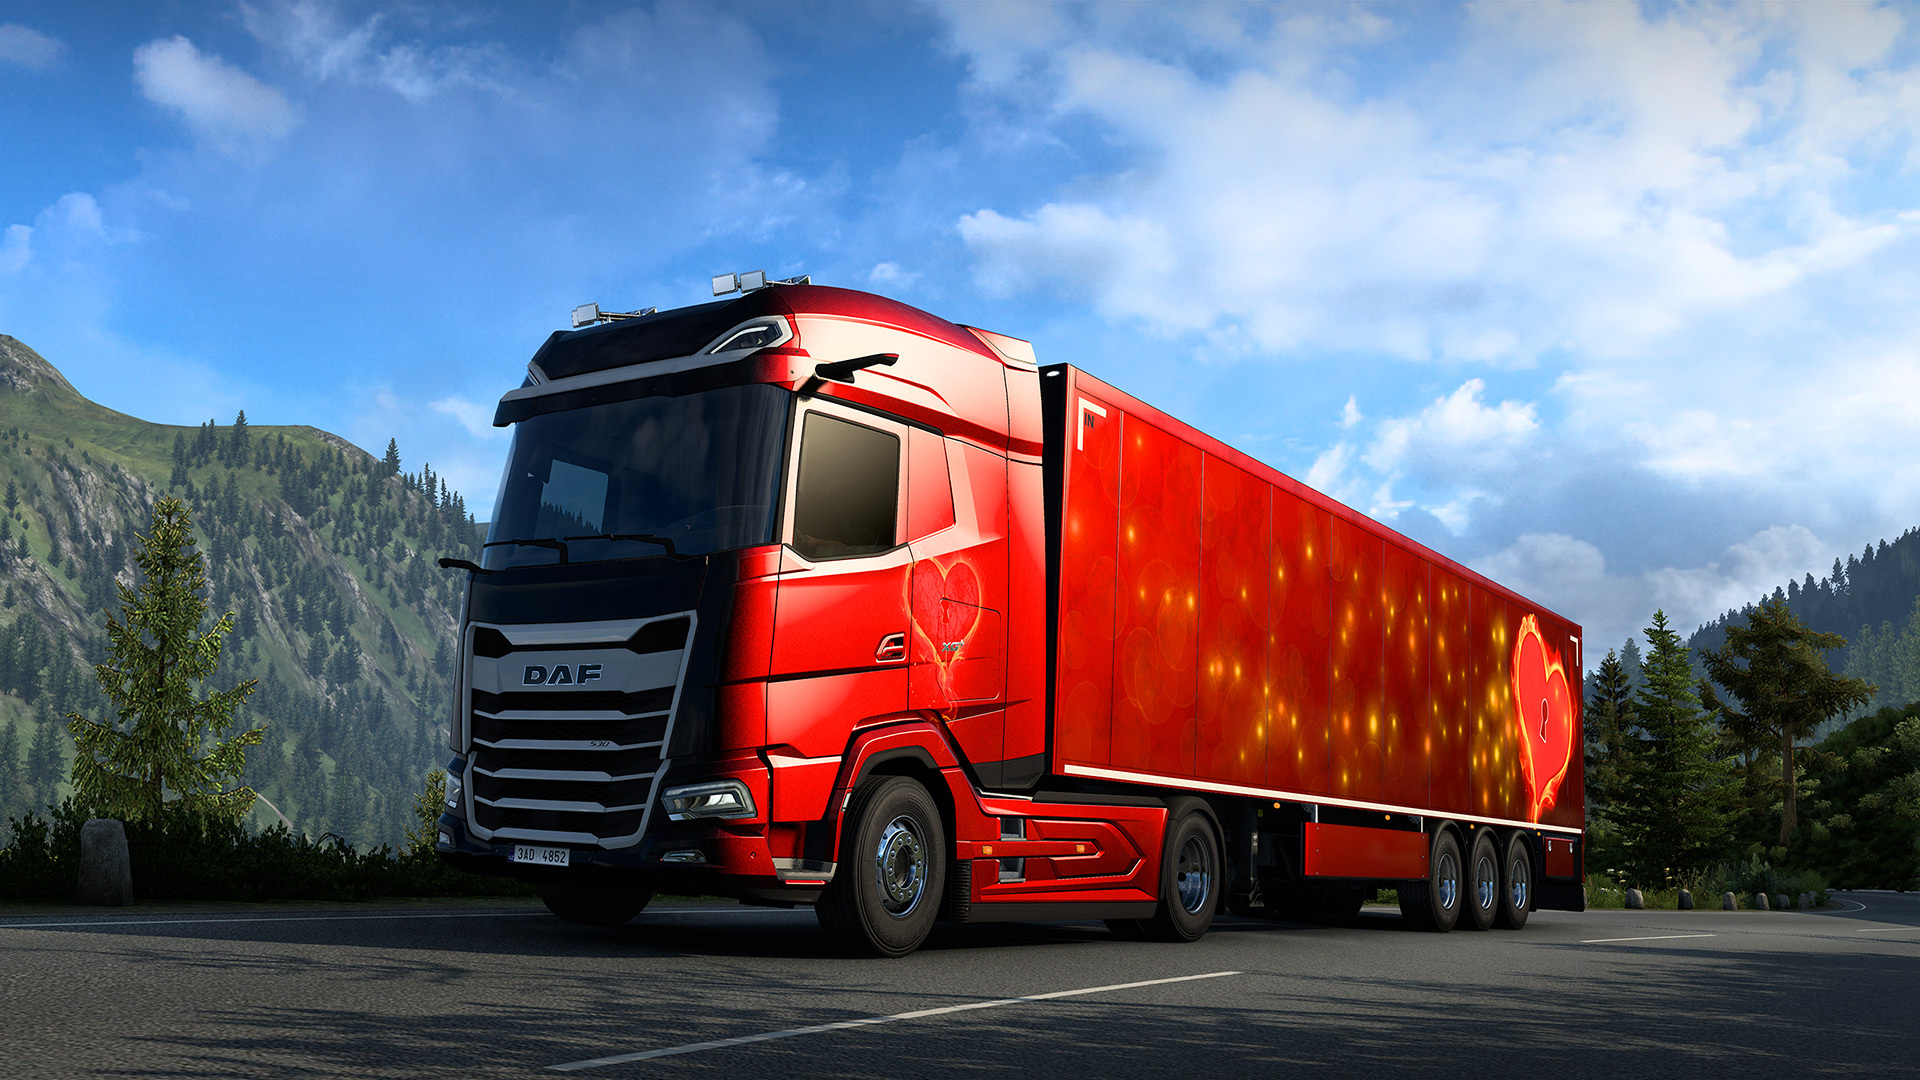 Euro Truck Simulator 2 is quietly one of the best open world games